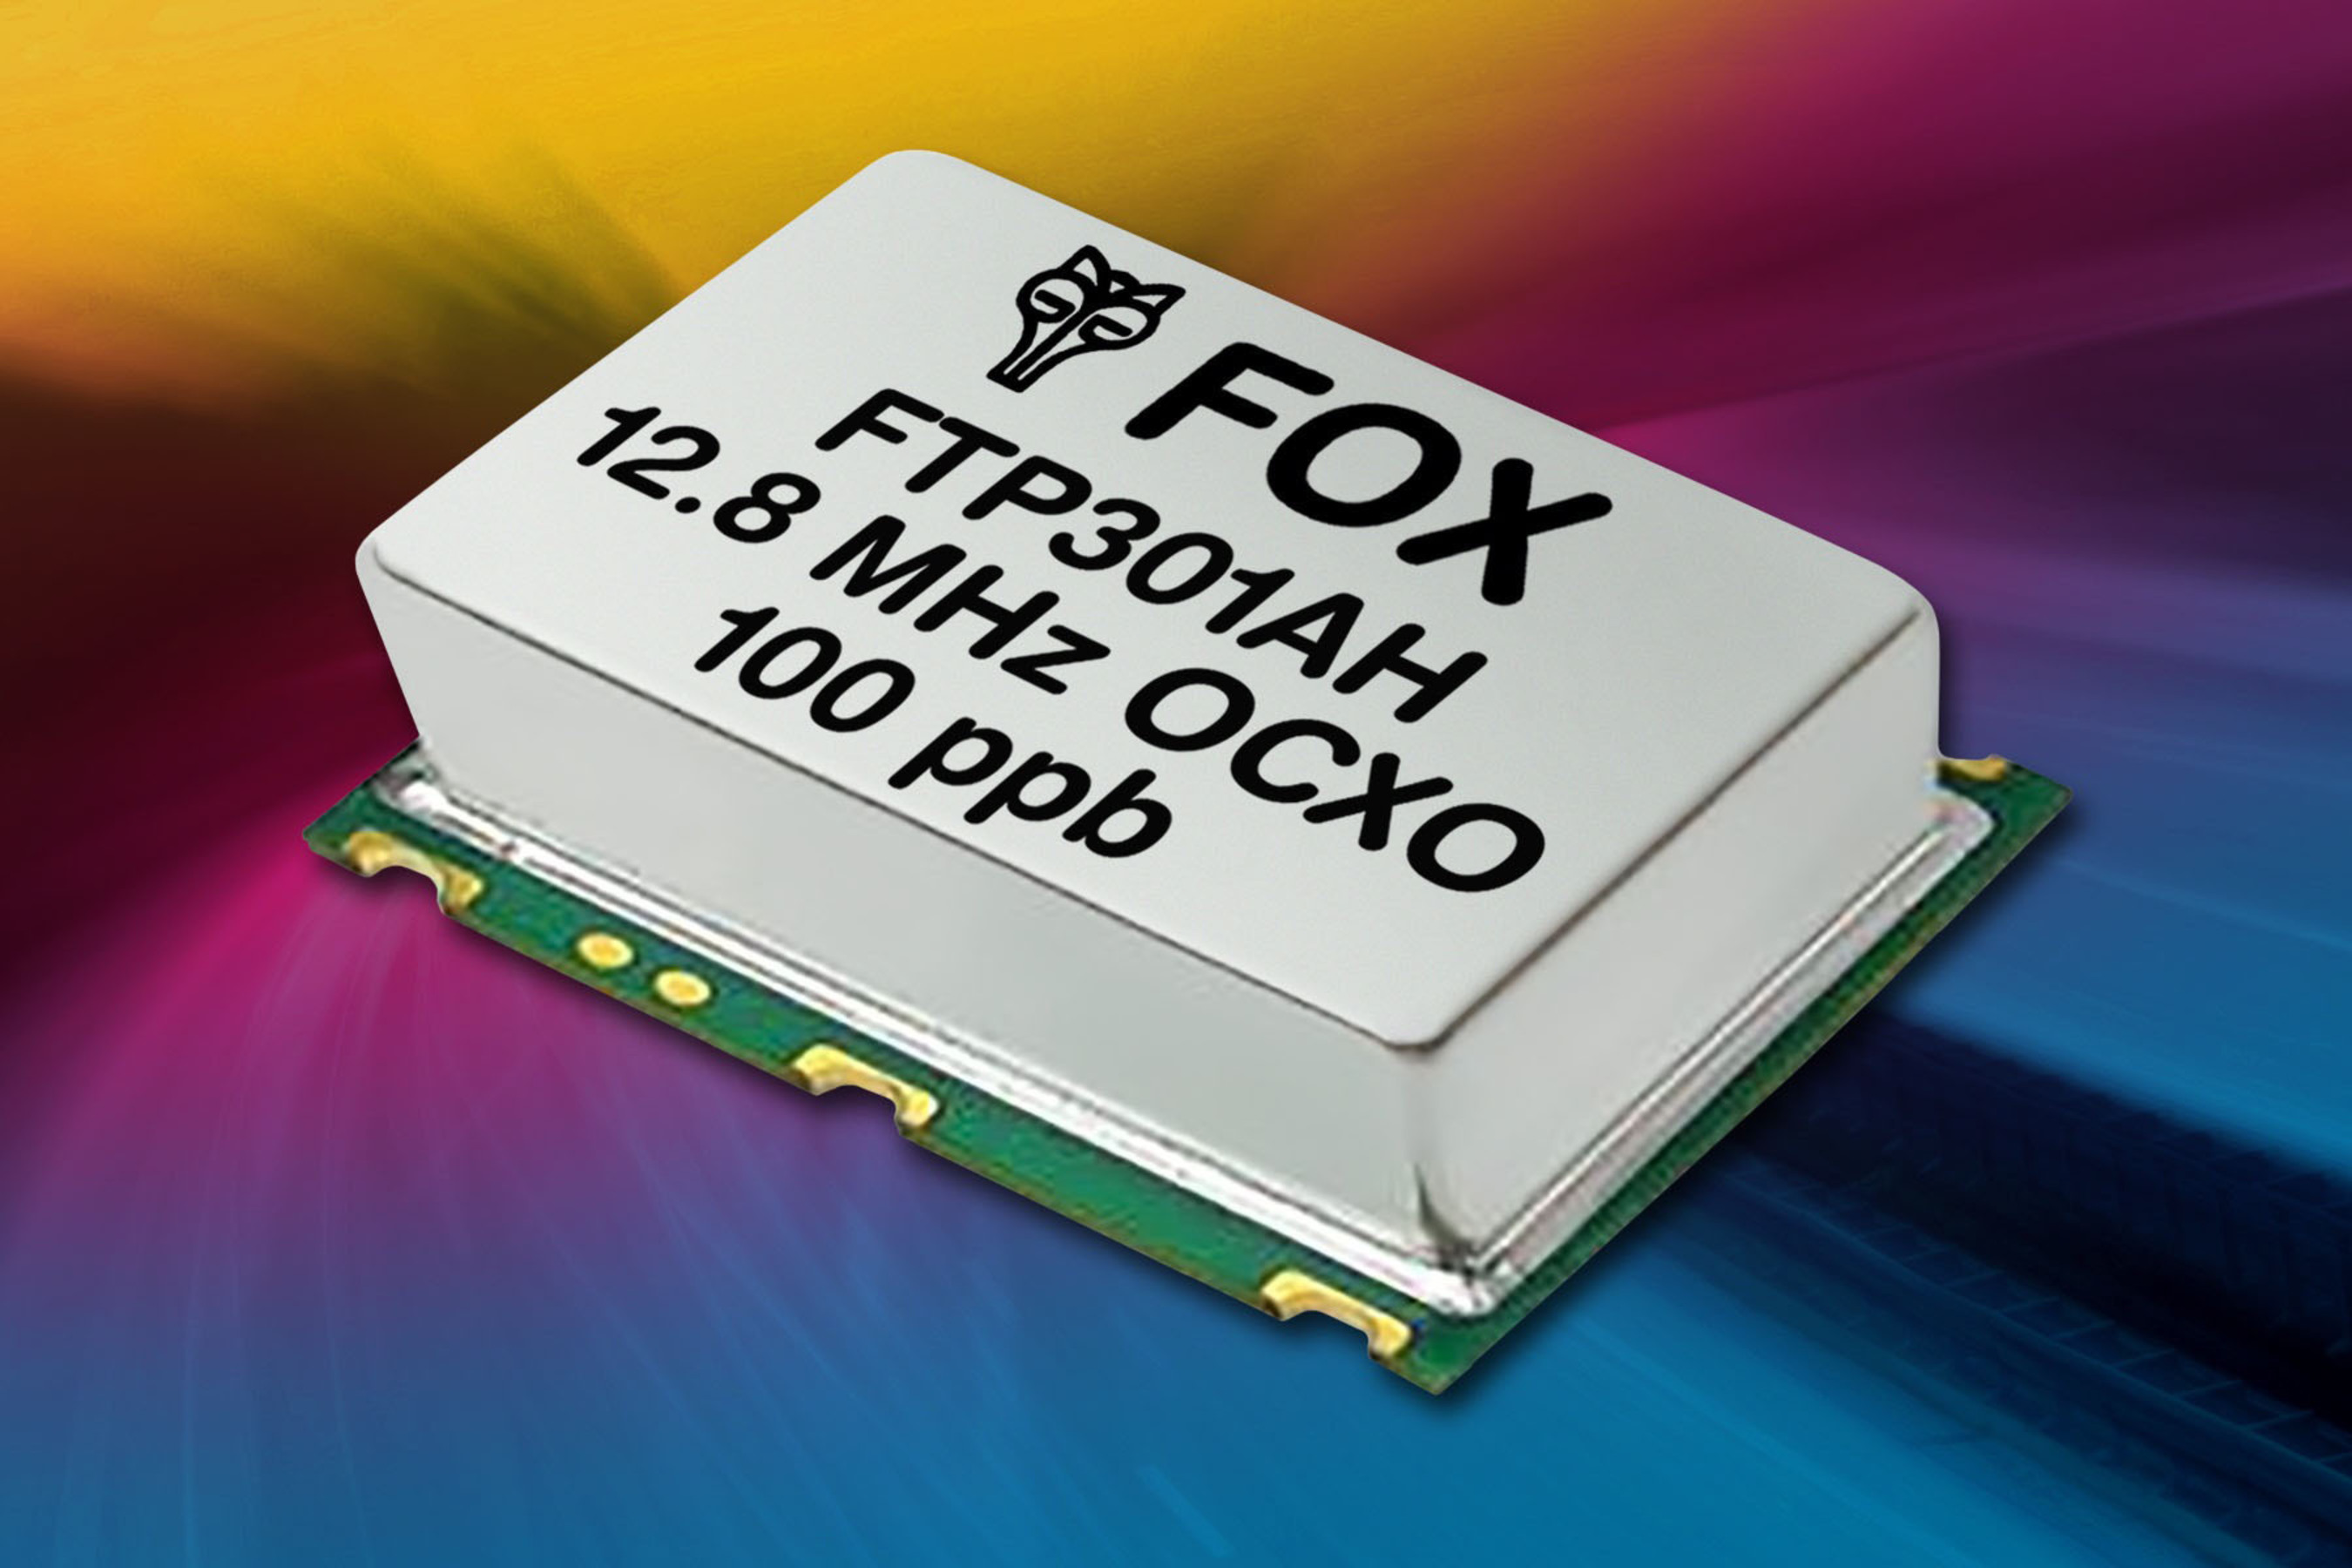 Compact Footprint, Reliable Operating Performance Offered in New SMD OCXO from Fox. (PRNewsFoto/Fox Electronics) (PRNewsFoto/FOX ELECTRONICS)